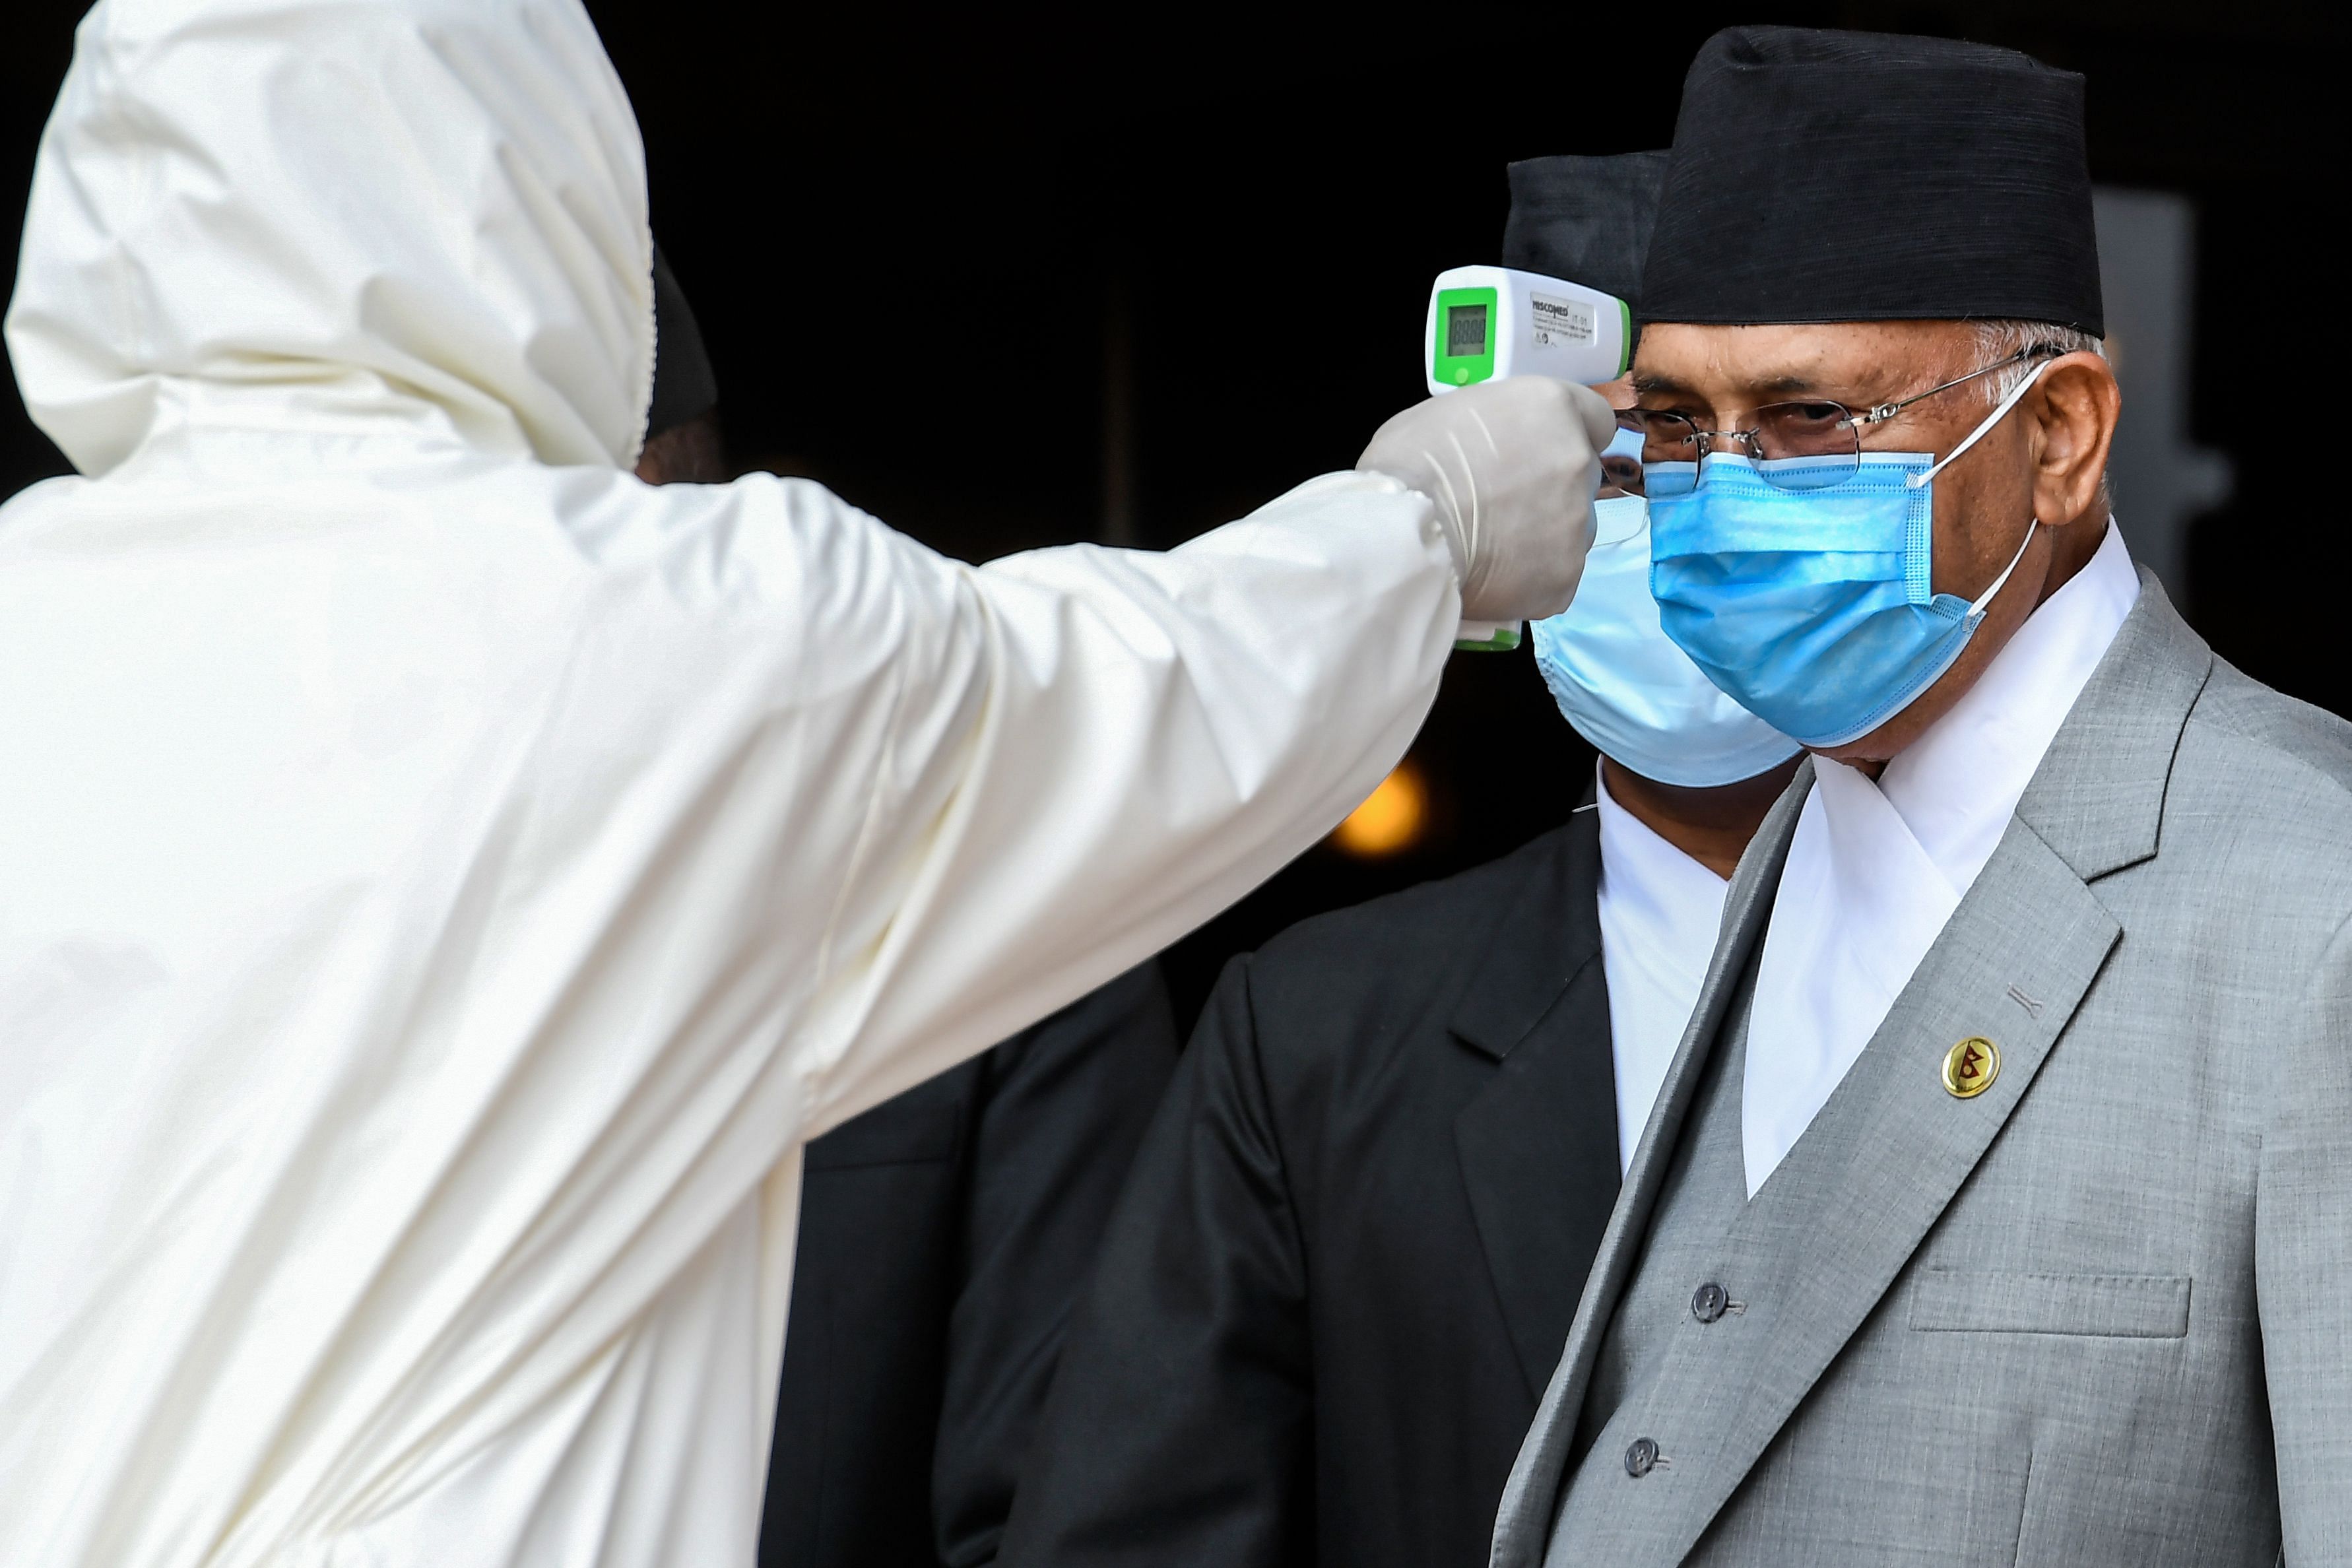 A health worker in protective gear checks the body temperature of Nepal's Prime Minister KP Sharma Oli (R) as he arrives at the parliament. Credit: AFP Photo